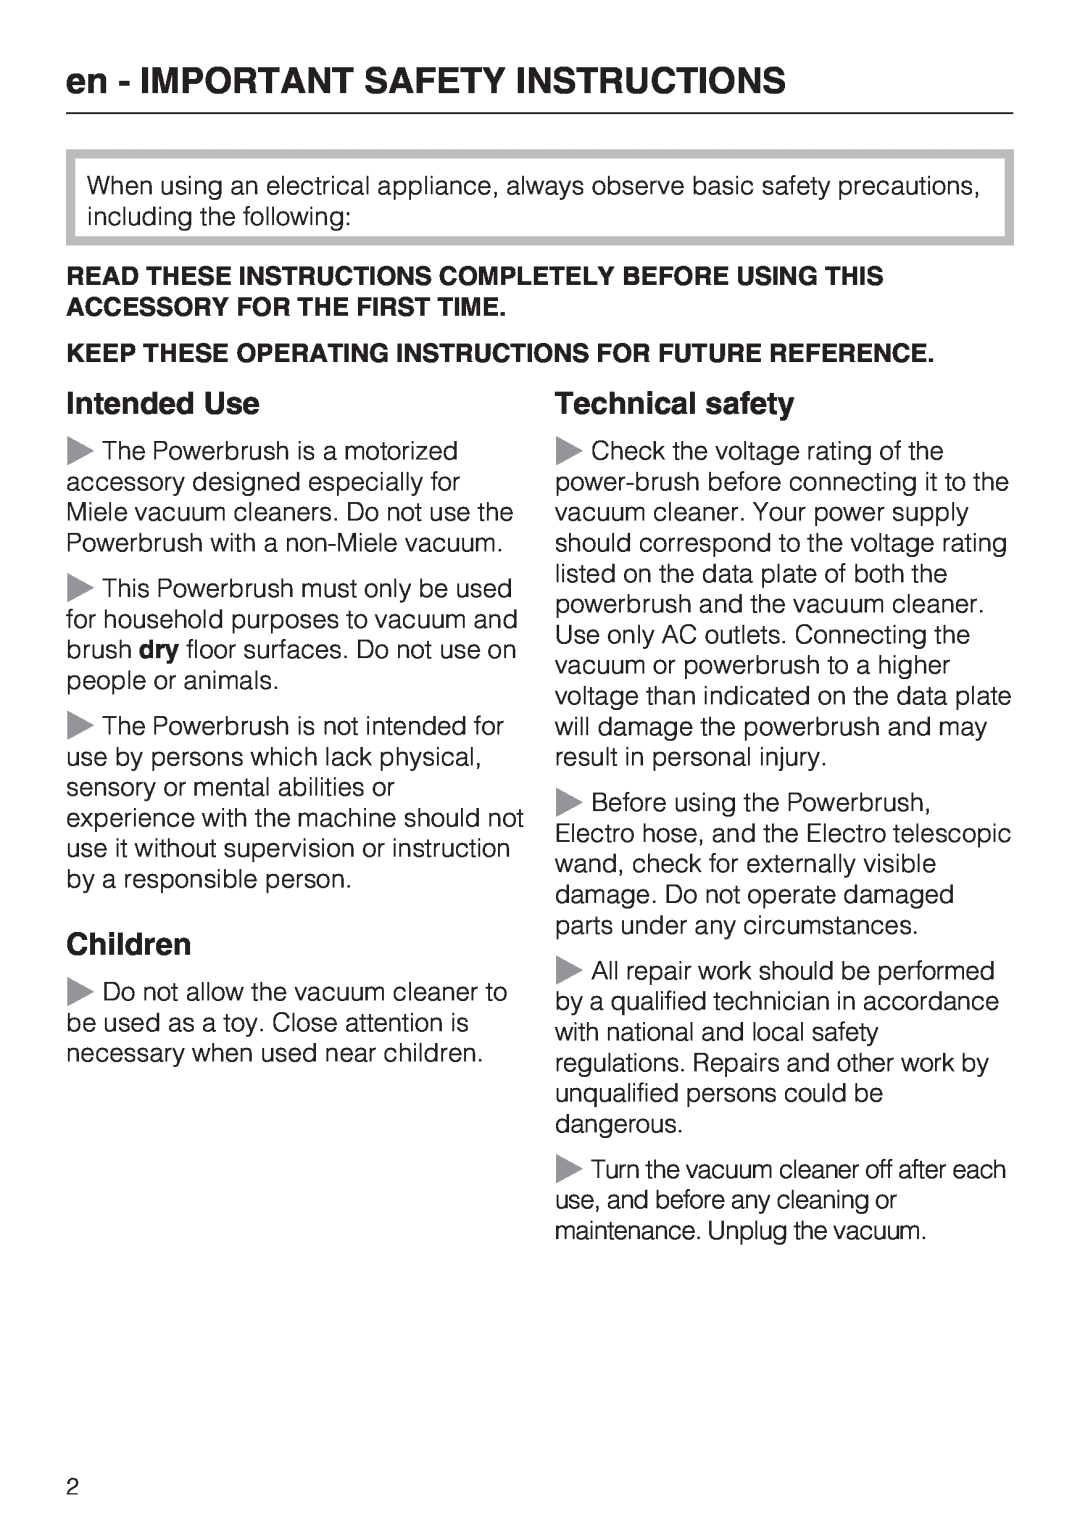 Miele SEB 228 manual en - IMPORTANT SAFETY INSTRUCTIONS, Intended Use, Children, Technical safety 